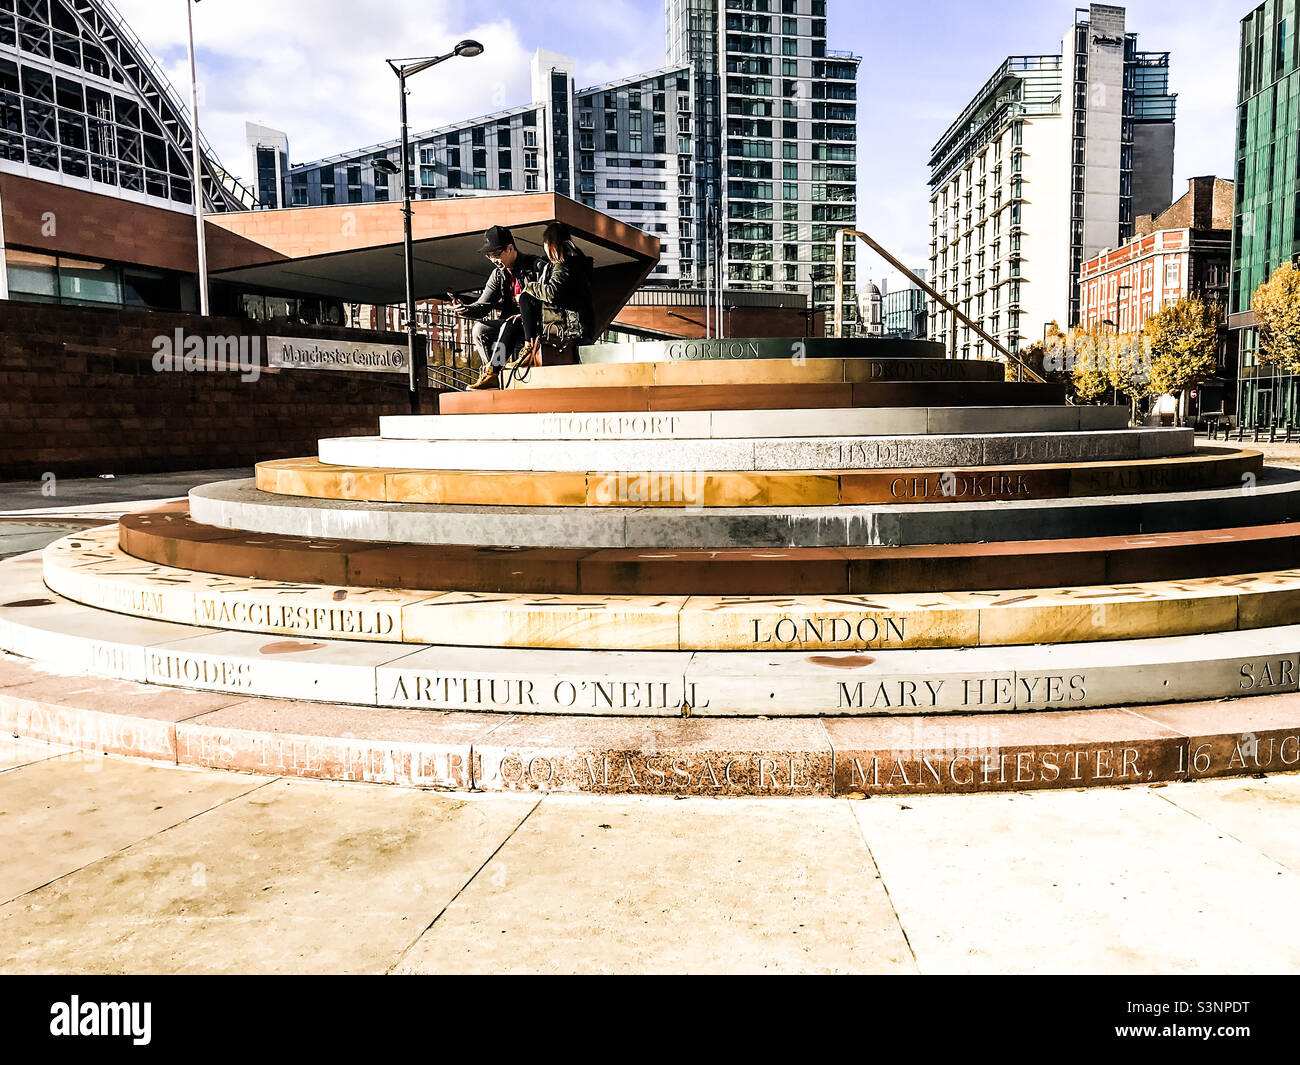 Manchester central and Peterloo memorial Stock Photo